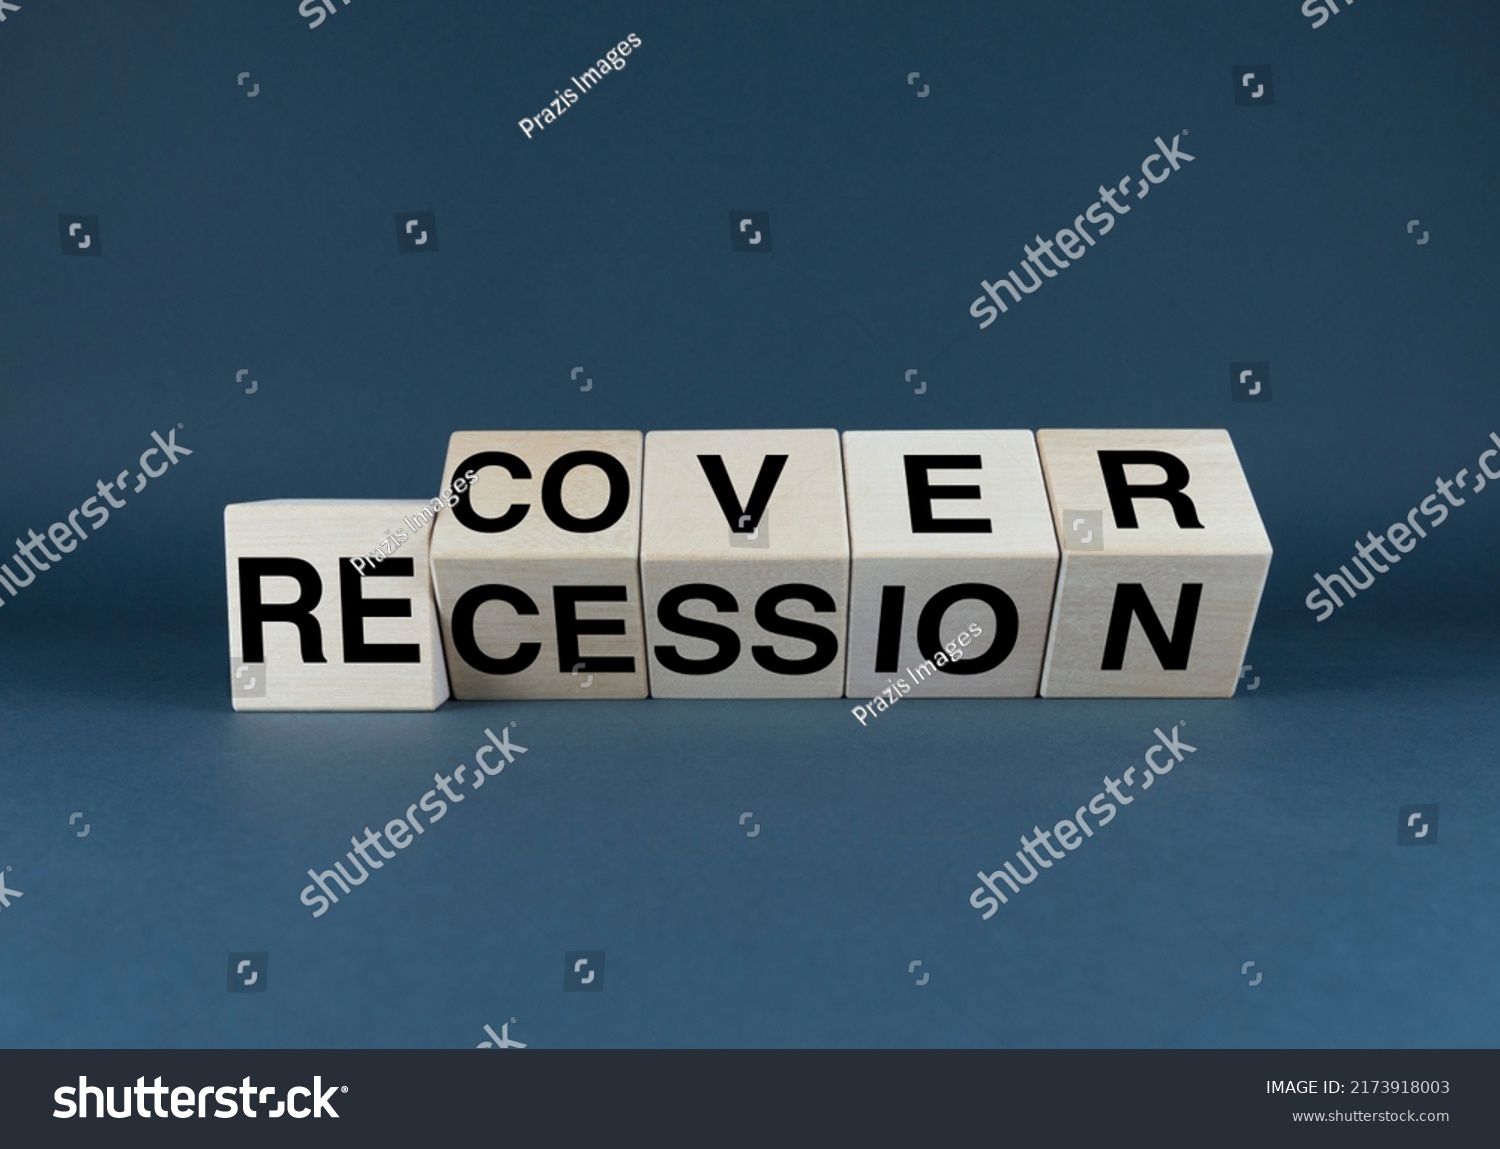 Recovery or recession. The cubes form the words Recover or Recession. A broad concept in both business and medicine #2173918003